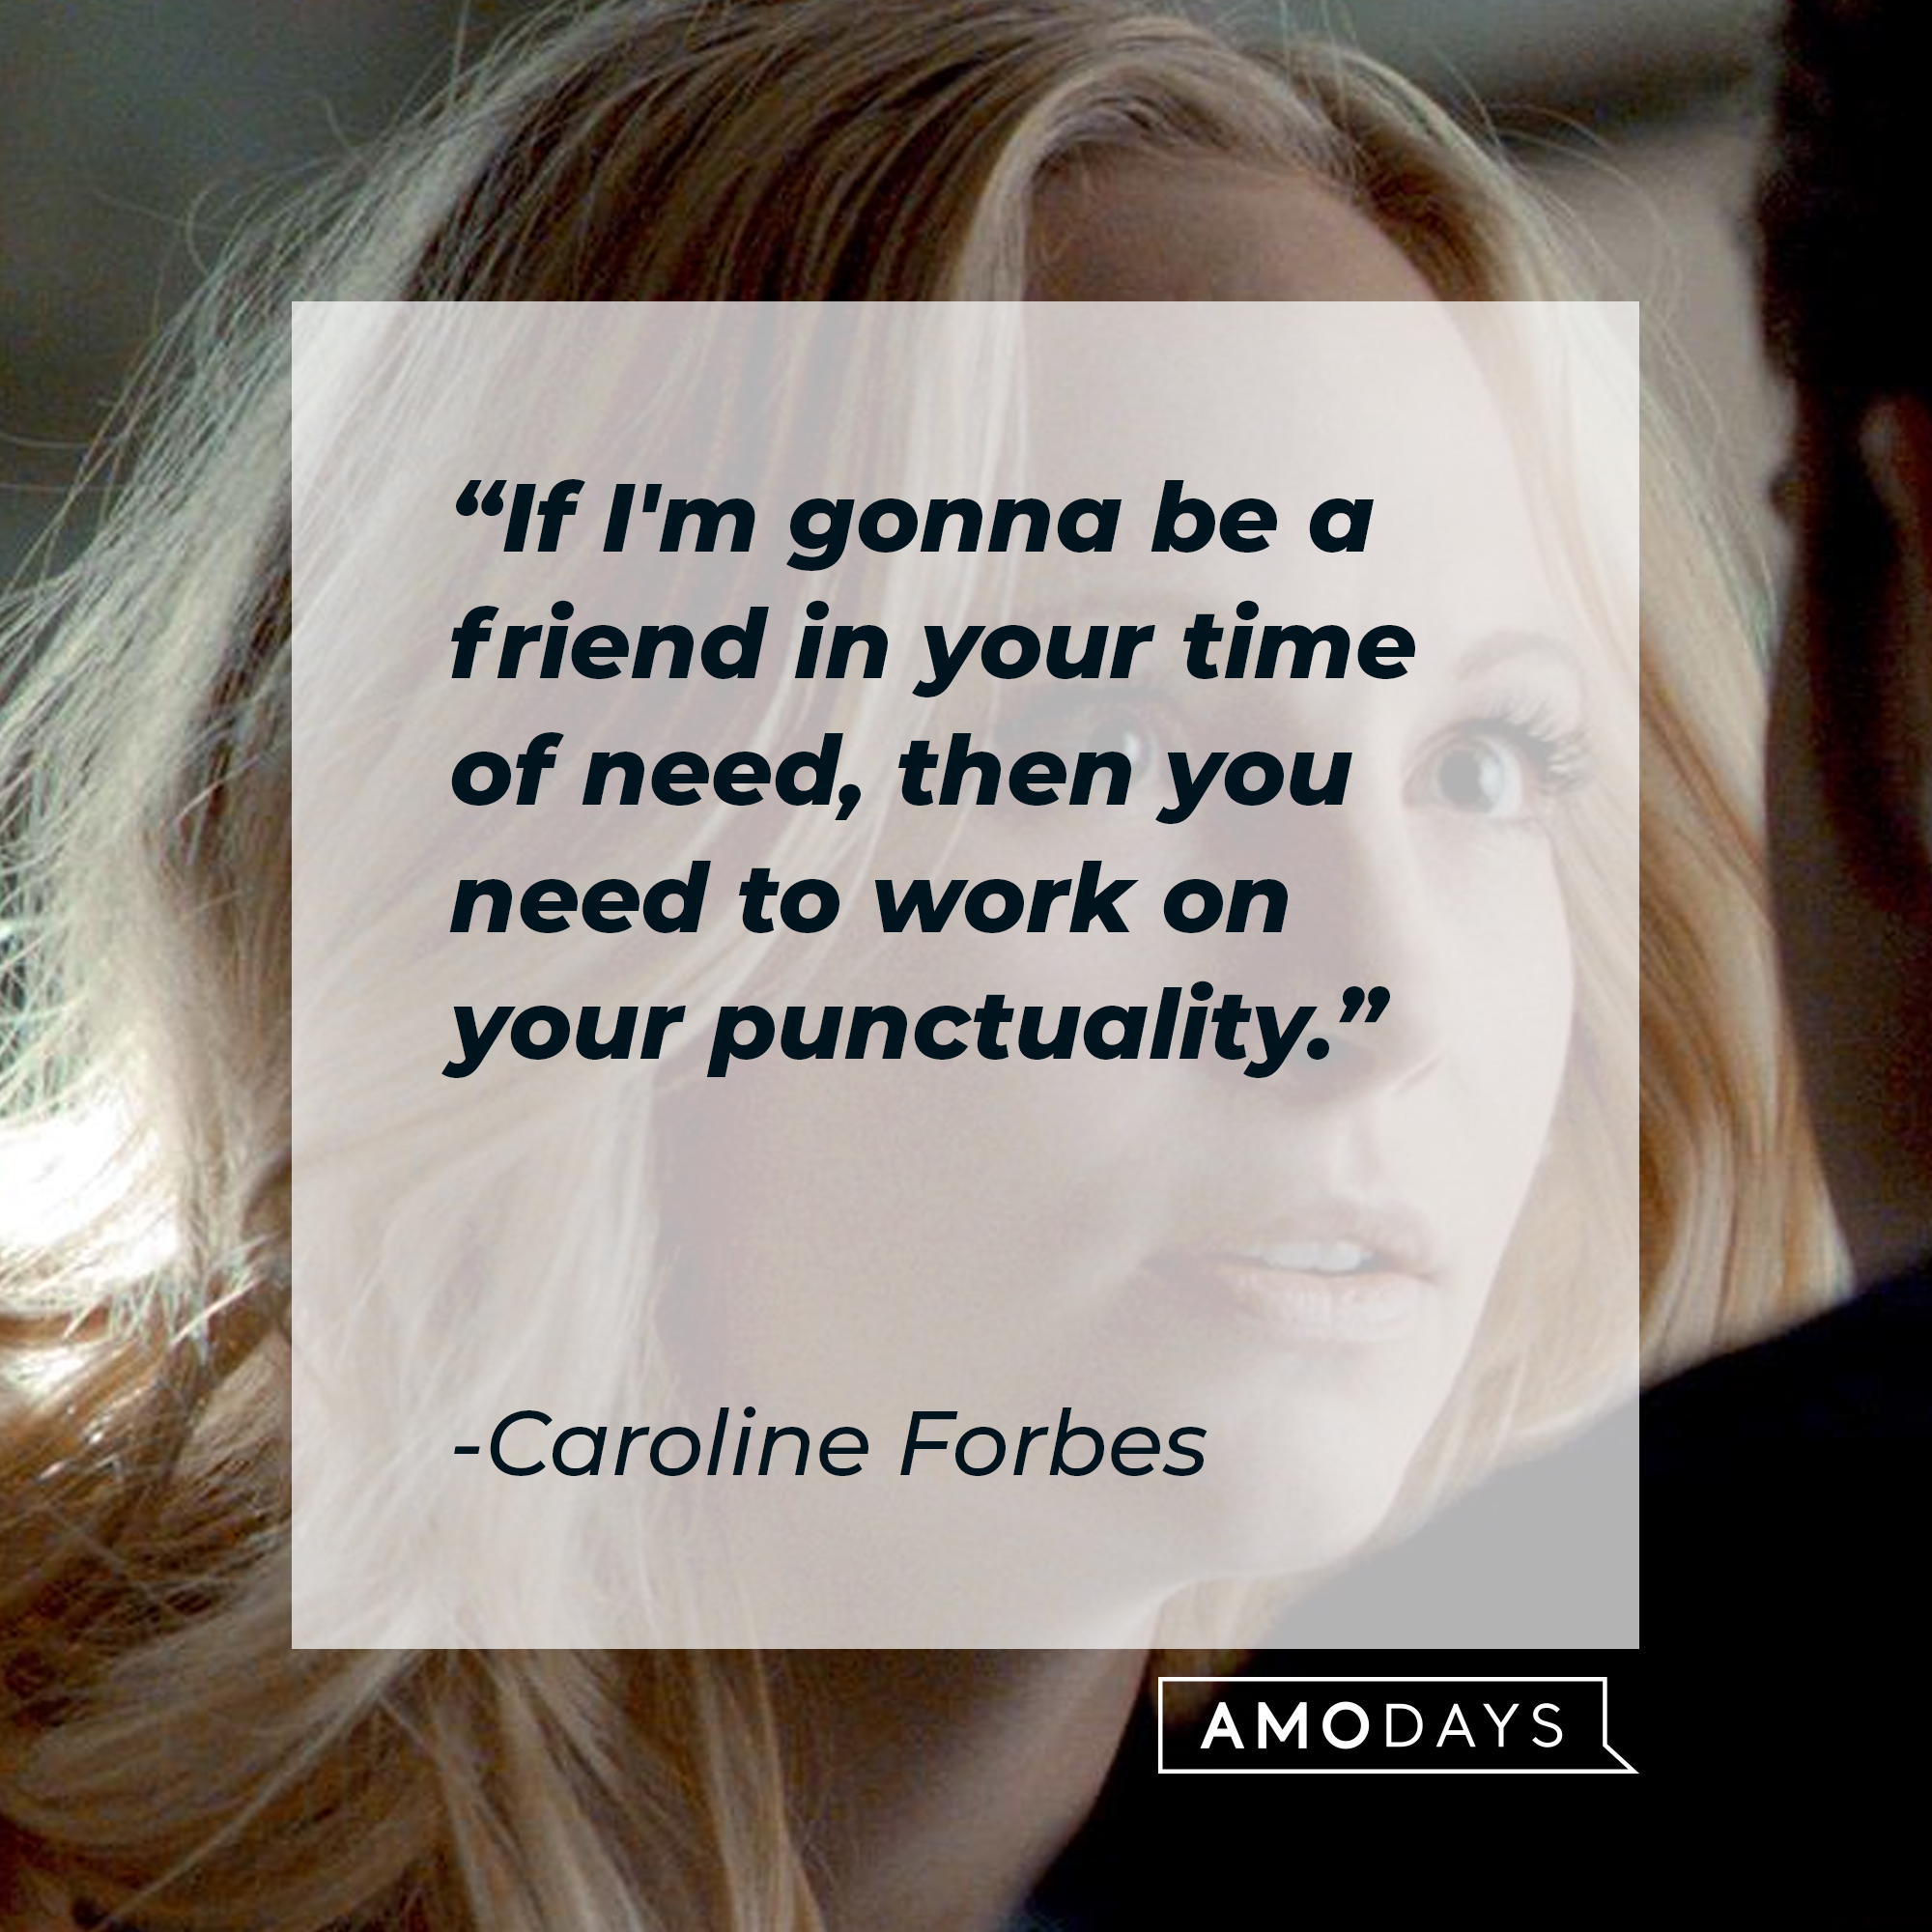 Caroline Forbes' quote: "If I'm gonna be a friend in your time of need, then you need to work on your punctuality." | Source: Facebook.com/thevampirediaries